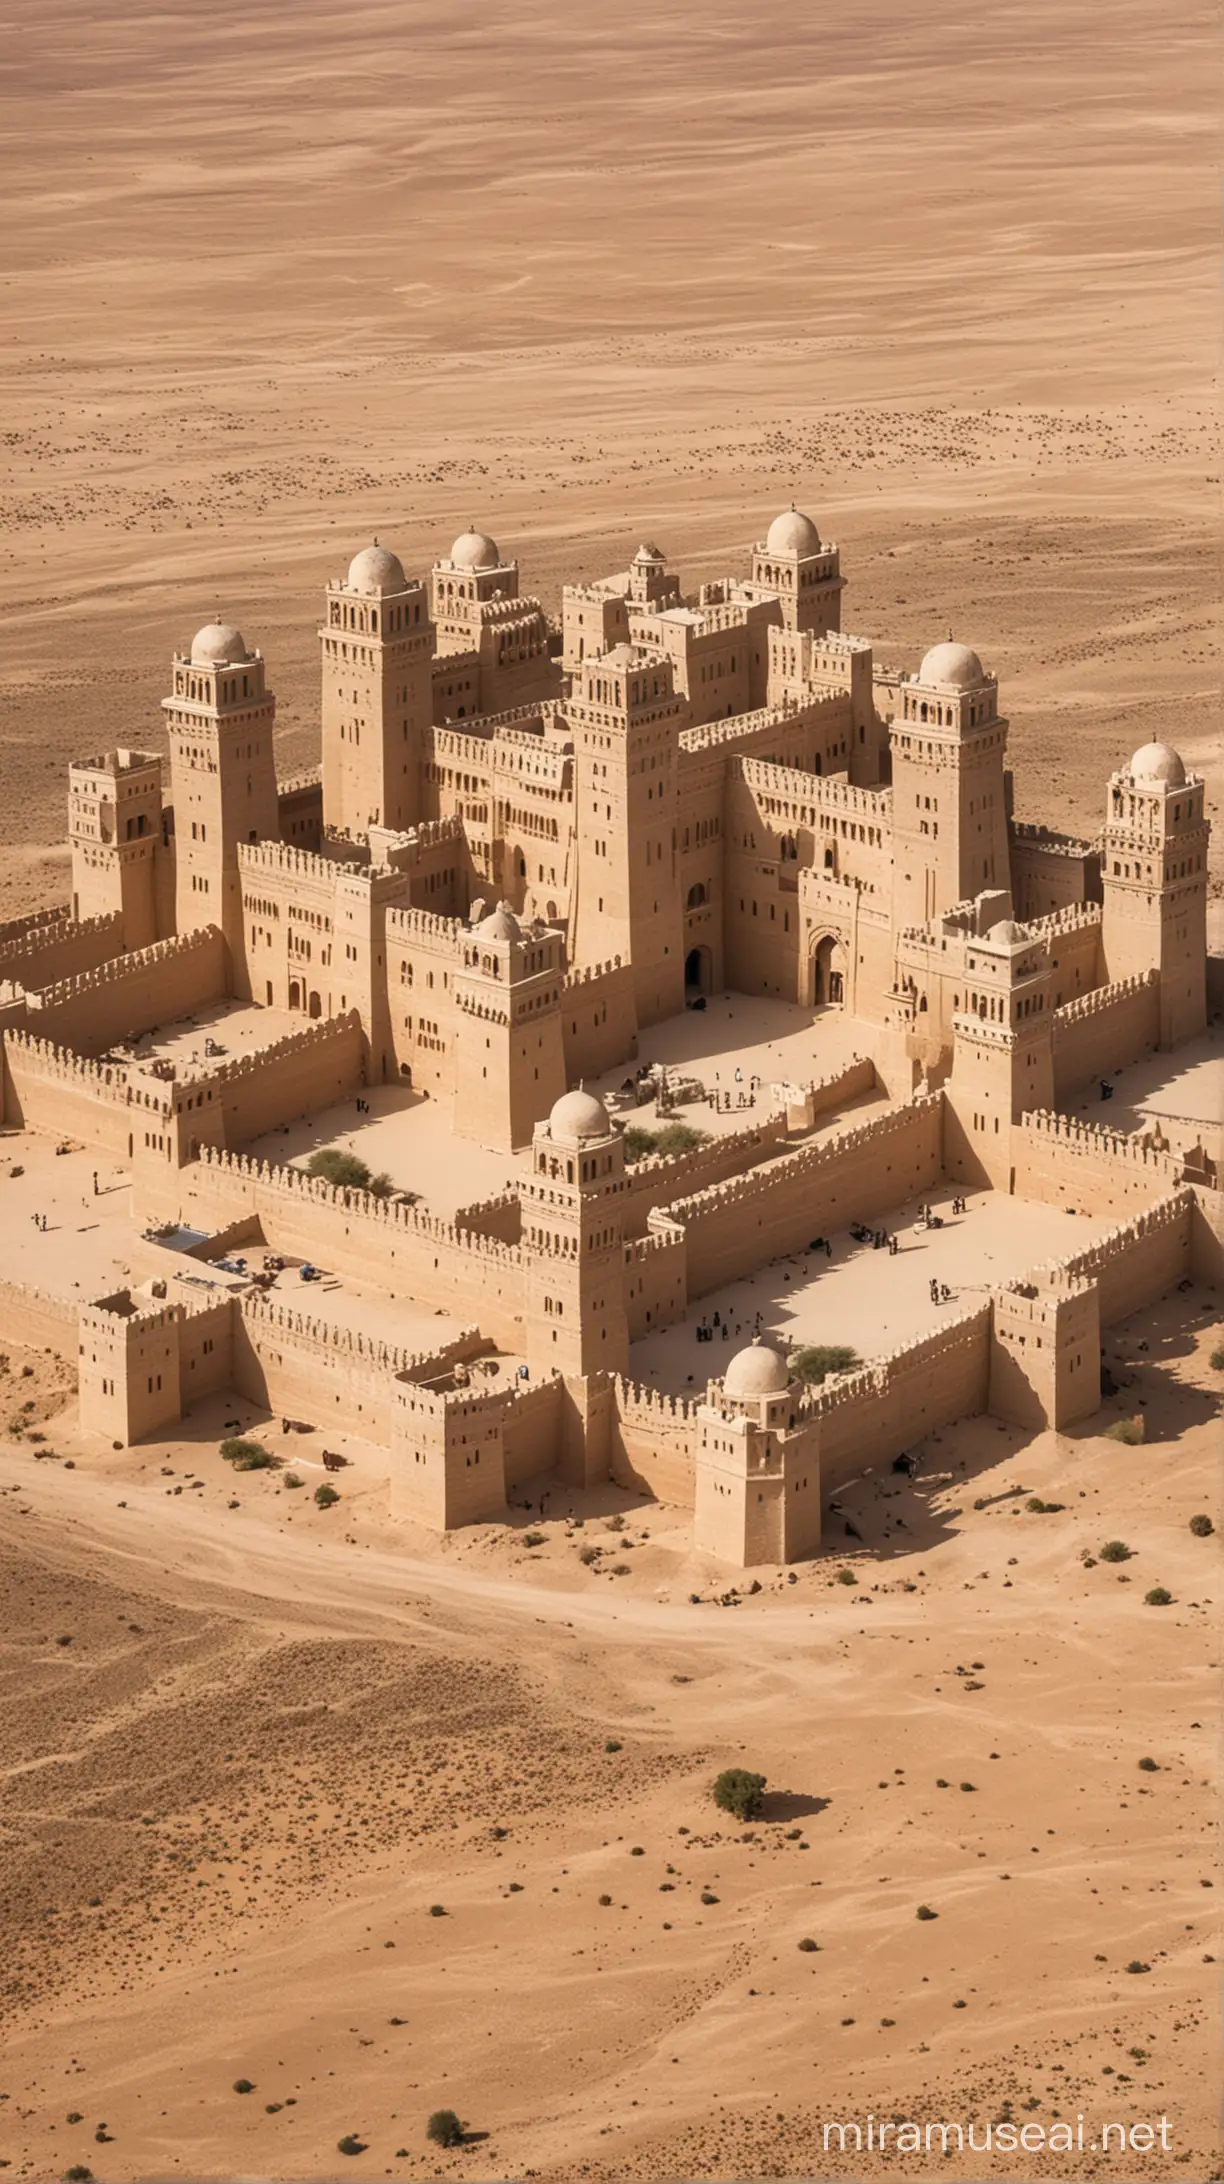 A palace with towers surrounded by walls in desert area